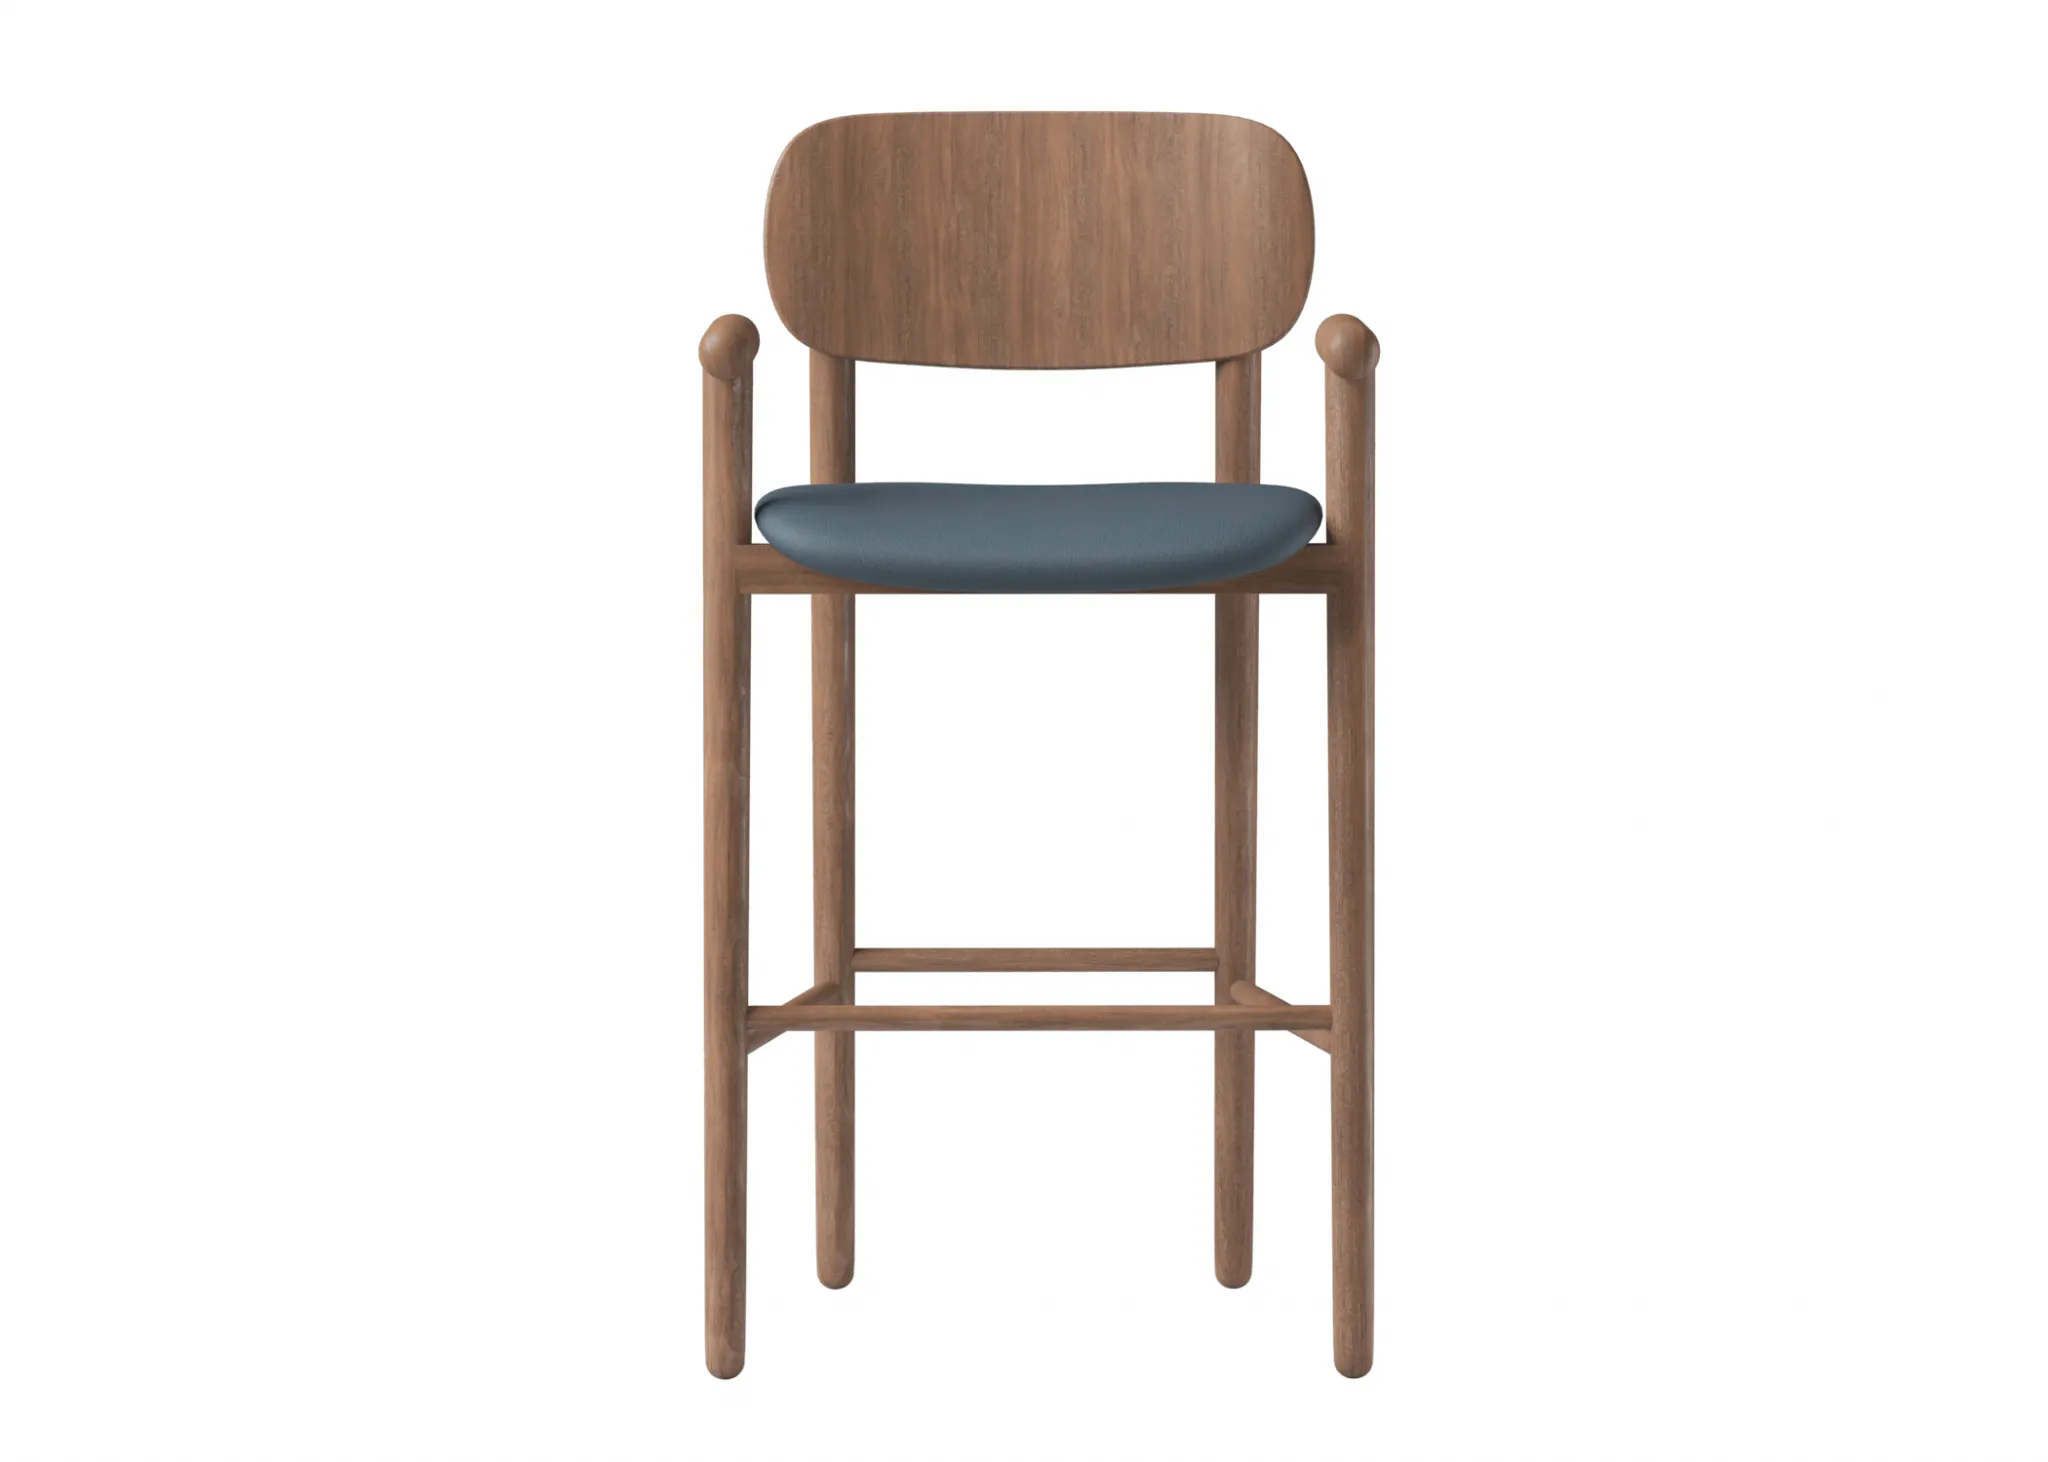 FURNITURE 3D MODELS – CHAIRS – 0269